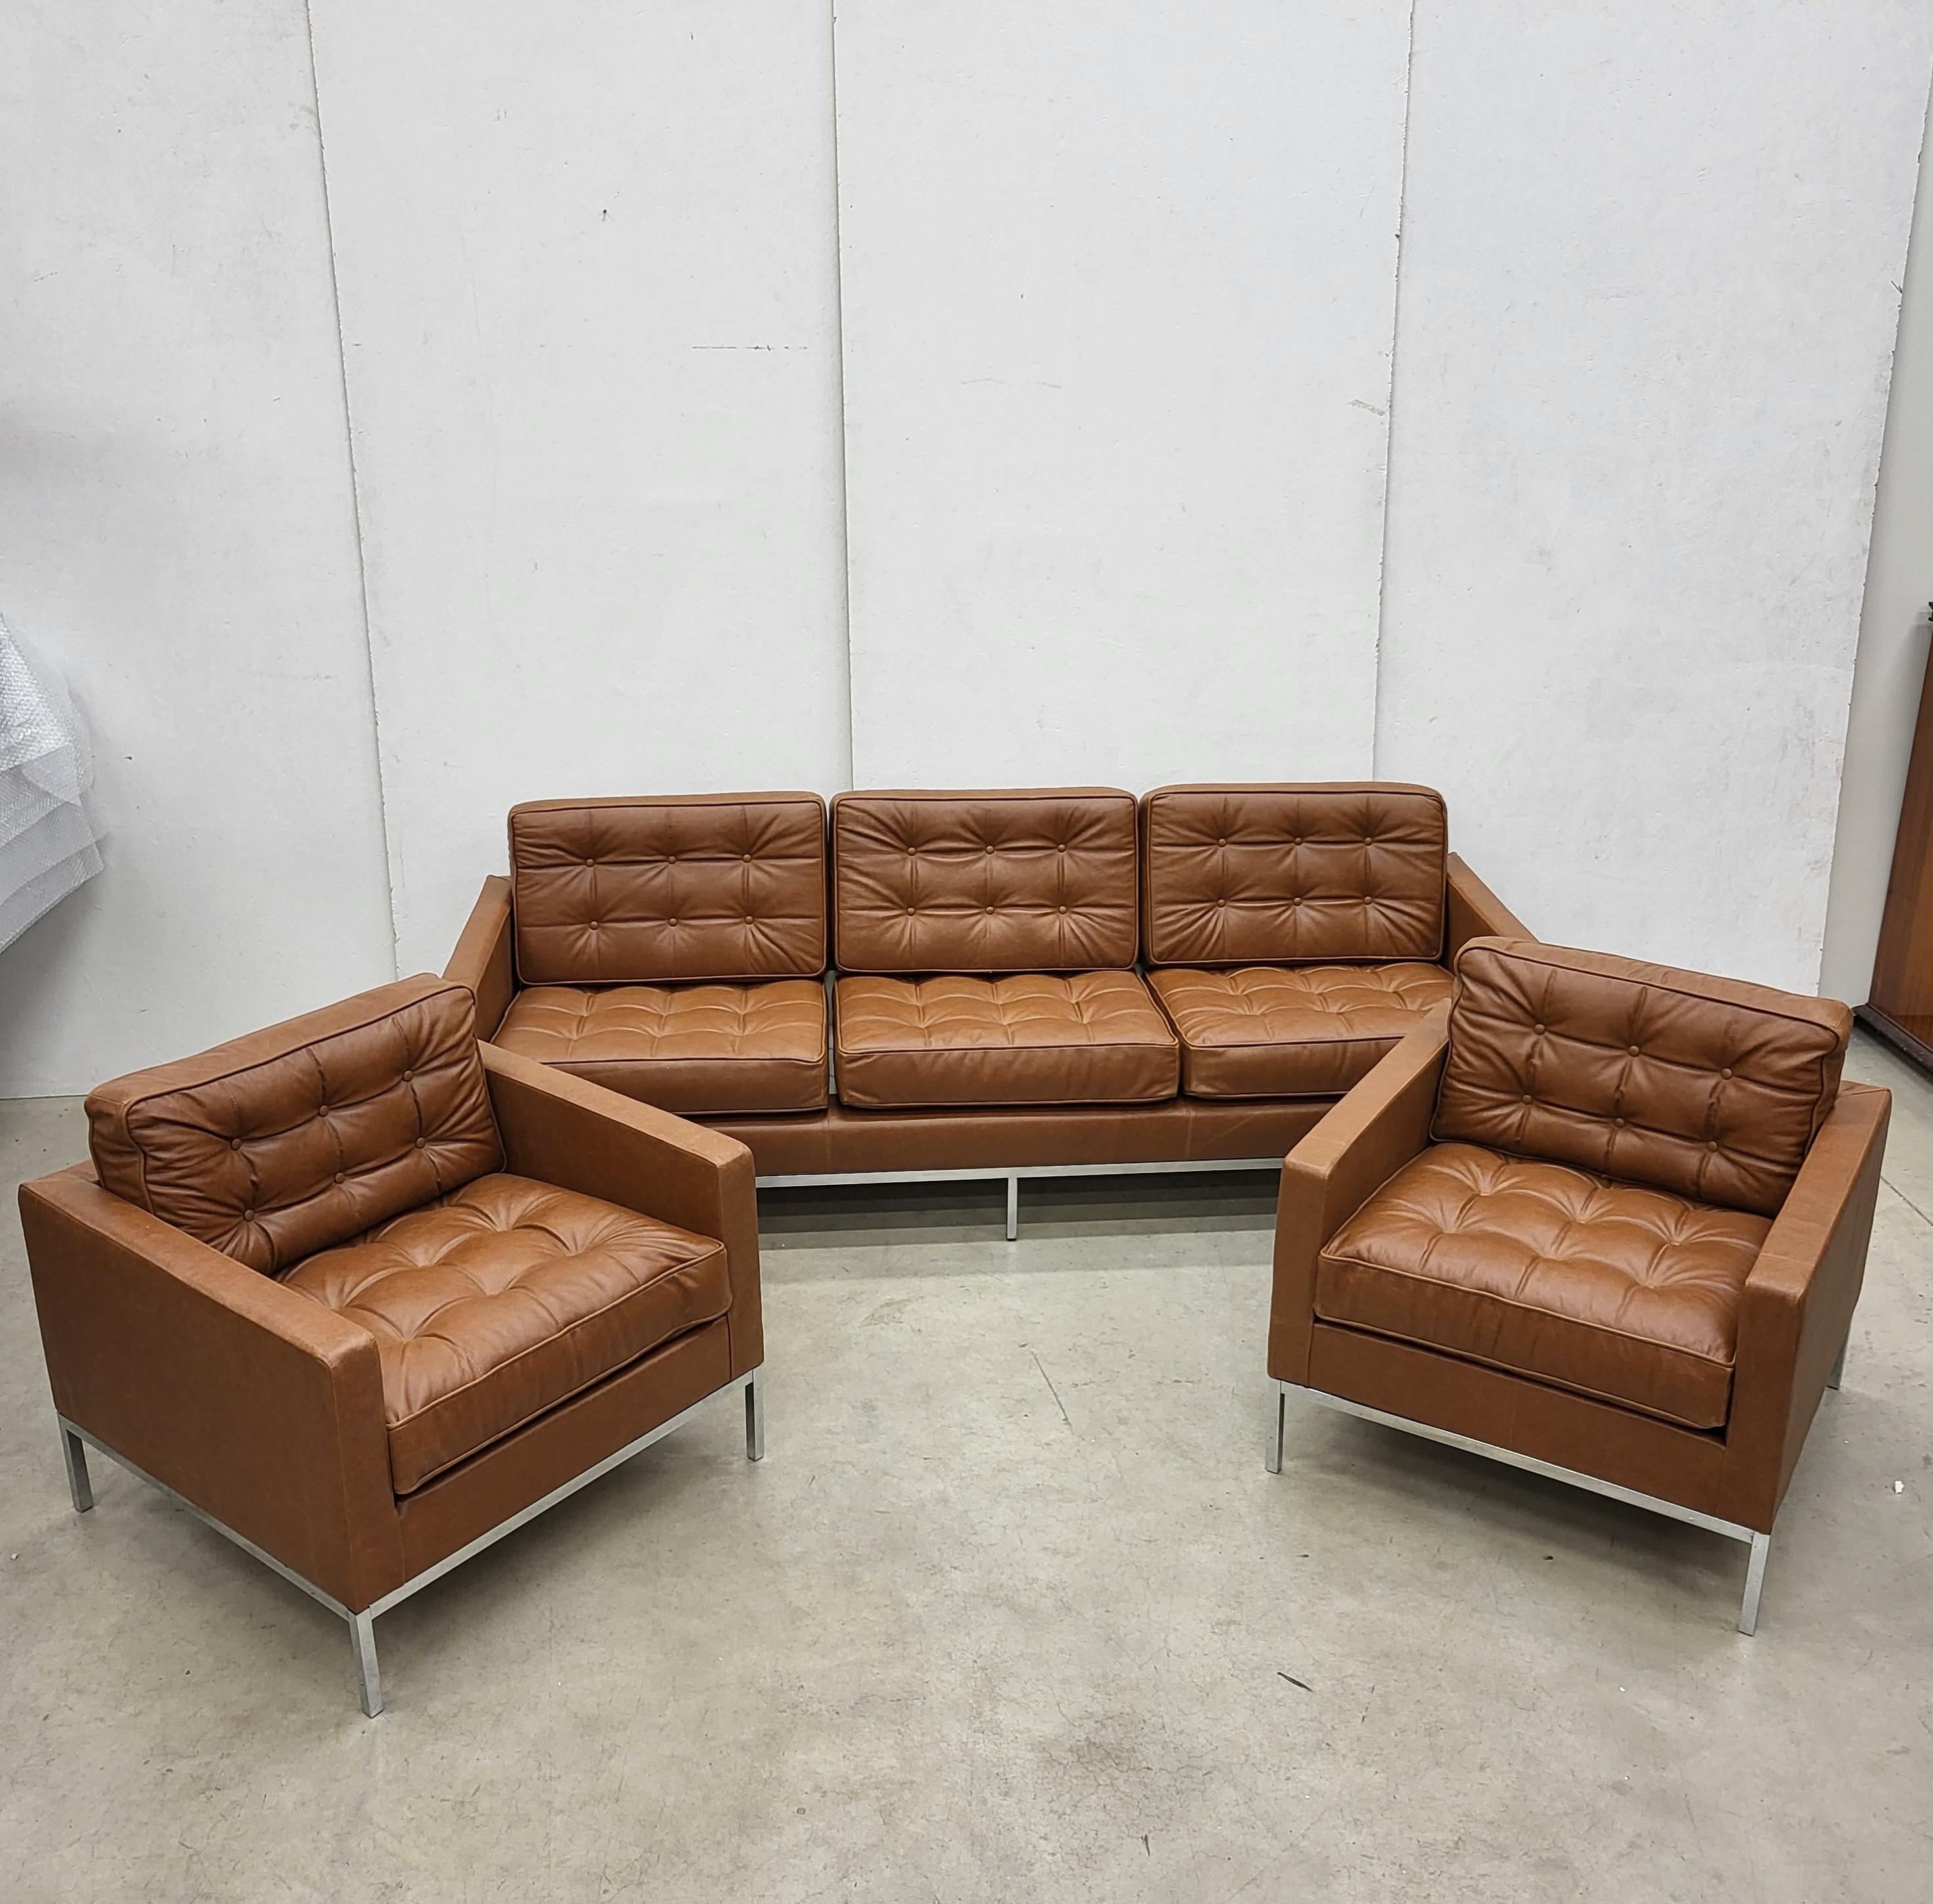 This timeless iconic sofa living room set was designed in 1954 by Florence Knoll and produced by Knoll International in the 1970s. The complete set has been carefully restored in a wonderful Pine Brown Cognac leather.

The set includes 2x 3 Seater